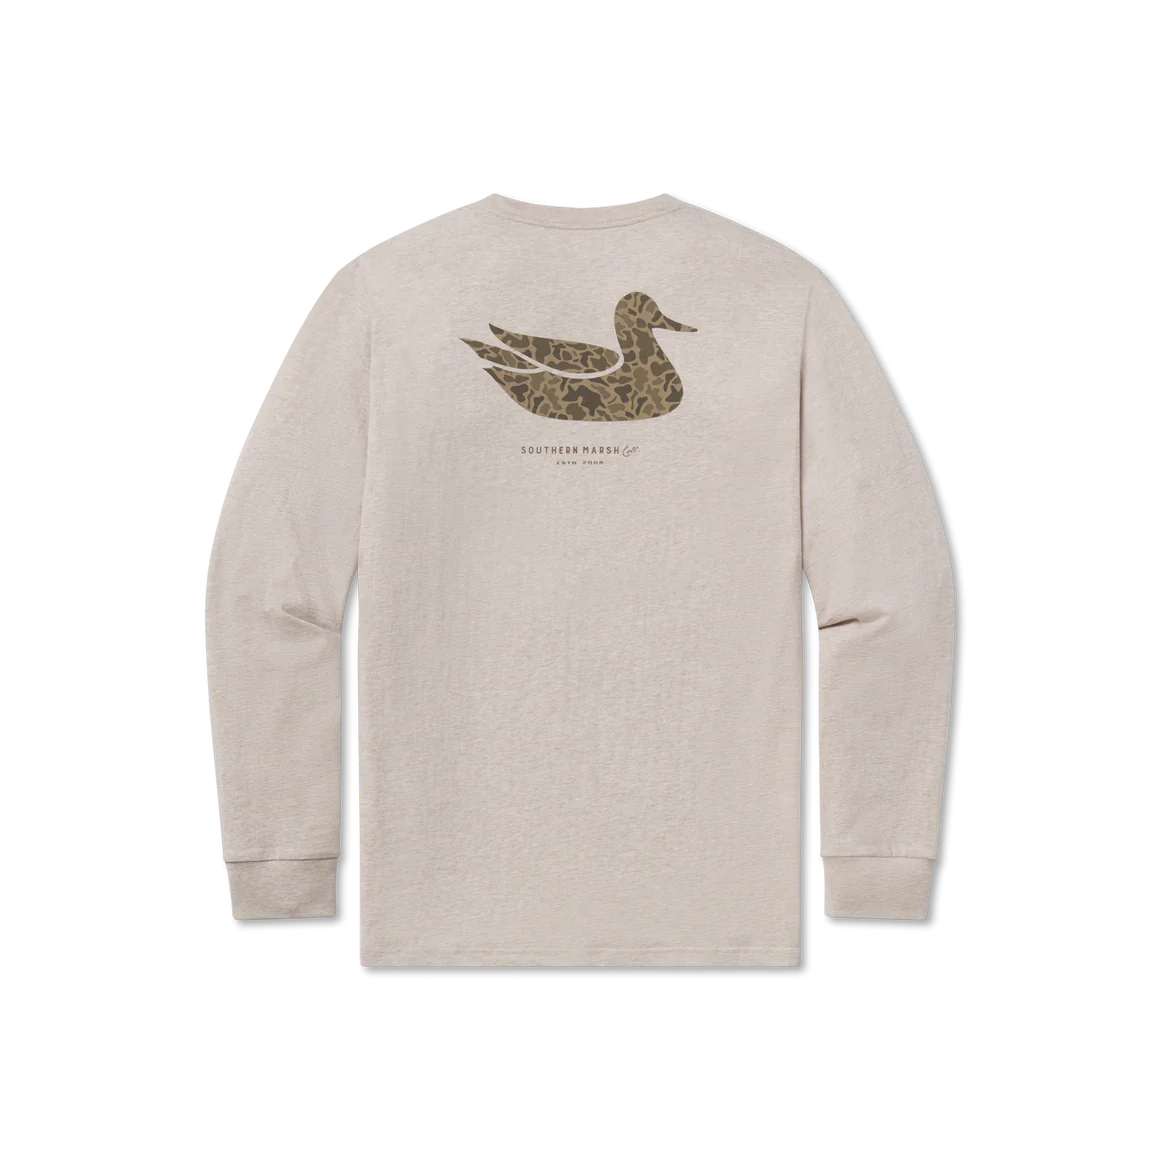 SOUTHERN MARSH COLLECTION Men's Tees Southern Marsh Duck Originals Tee Camo Long Sleeve || David's Clothing